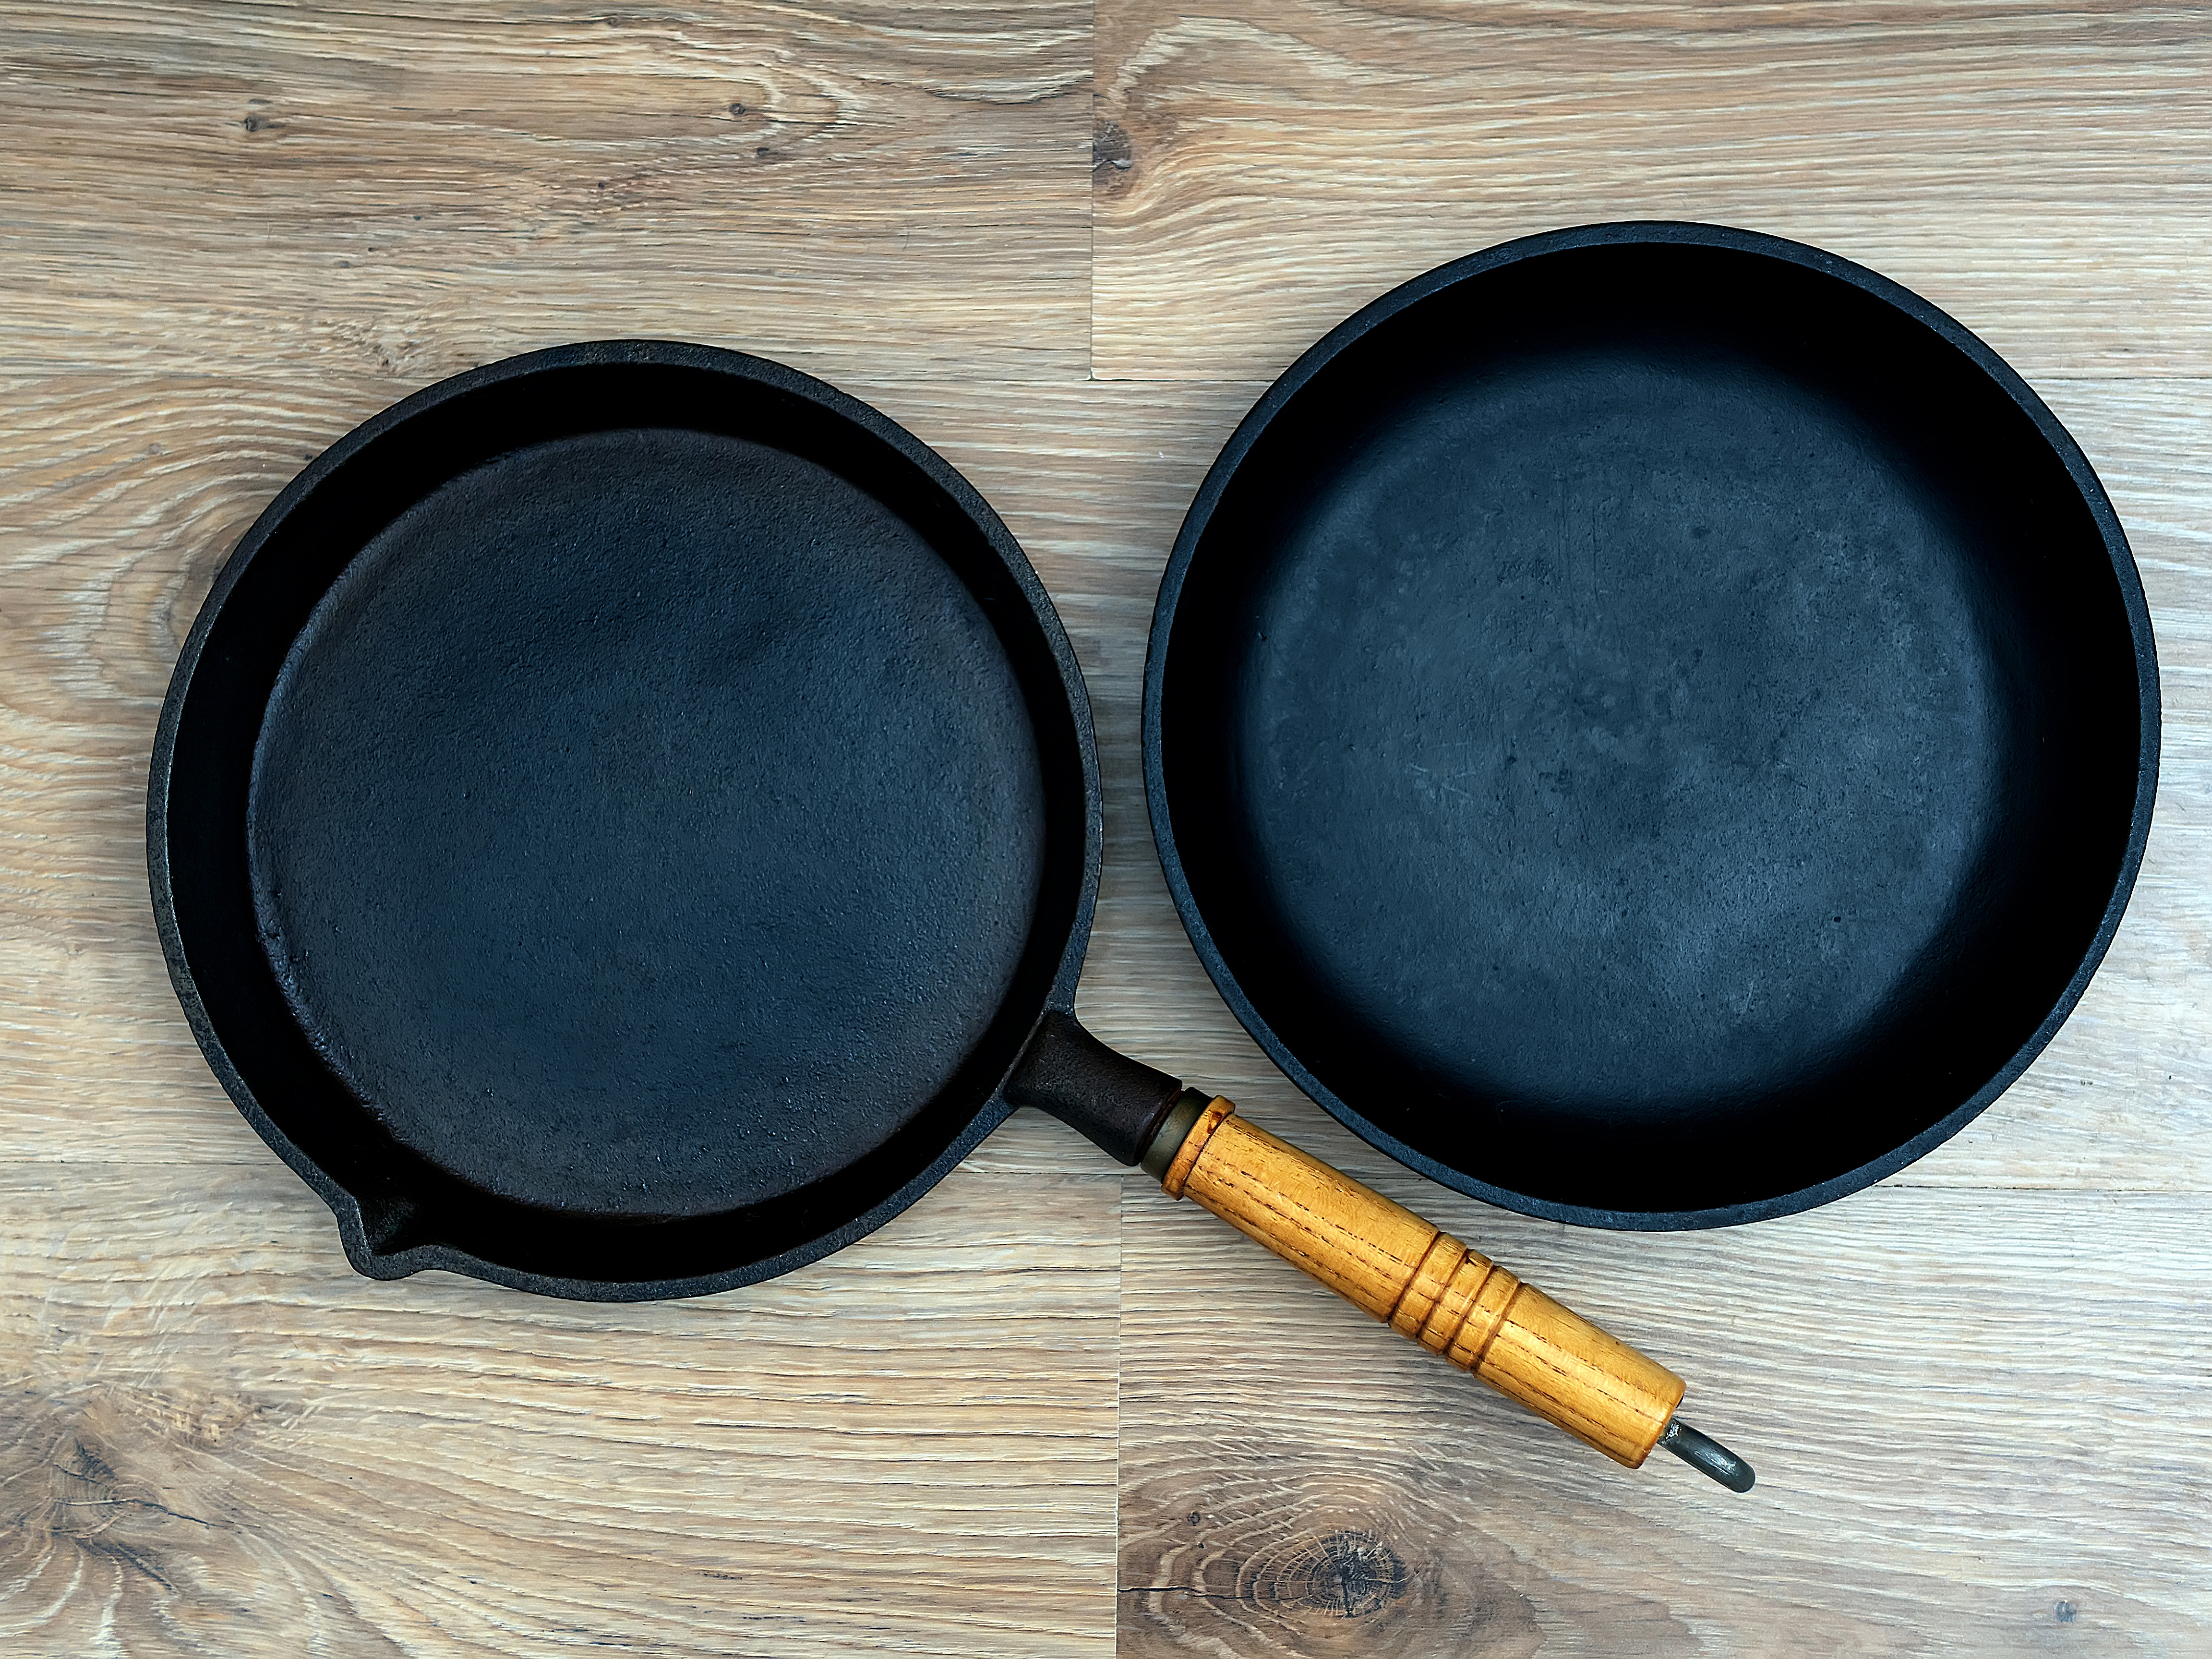 Why You Might Want To Avoid Cast-Iron Skillets With A Wooden Handle